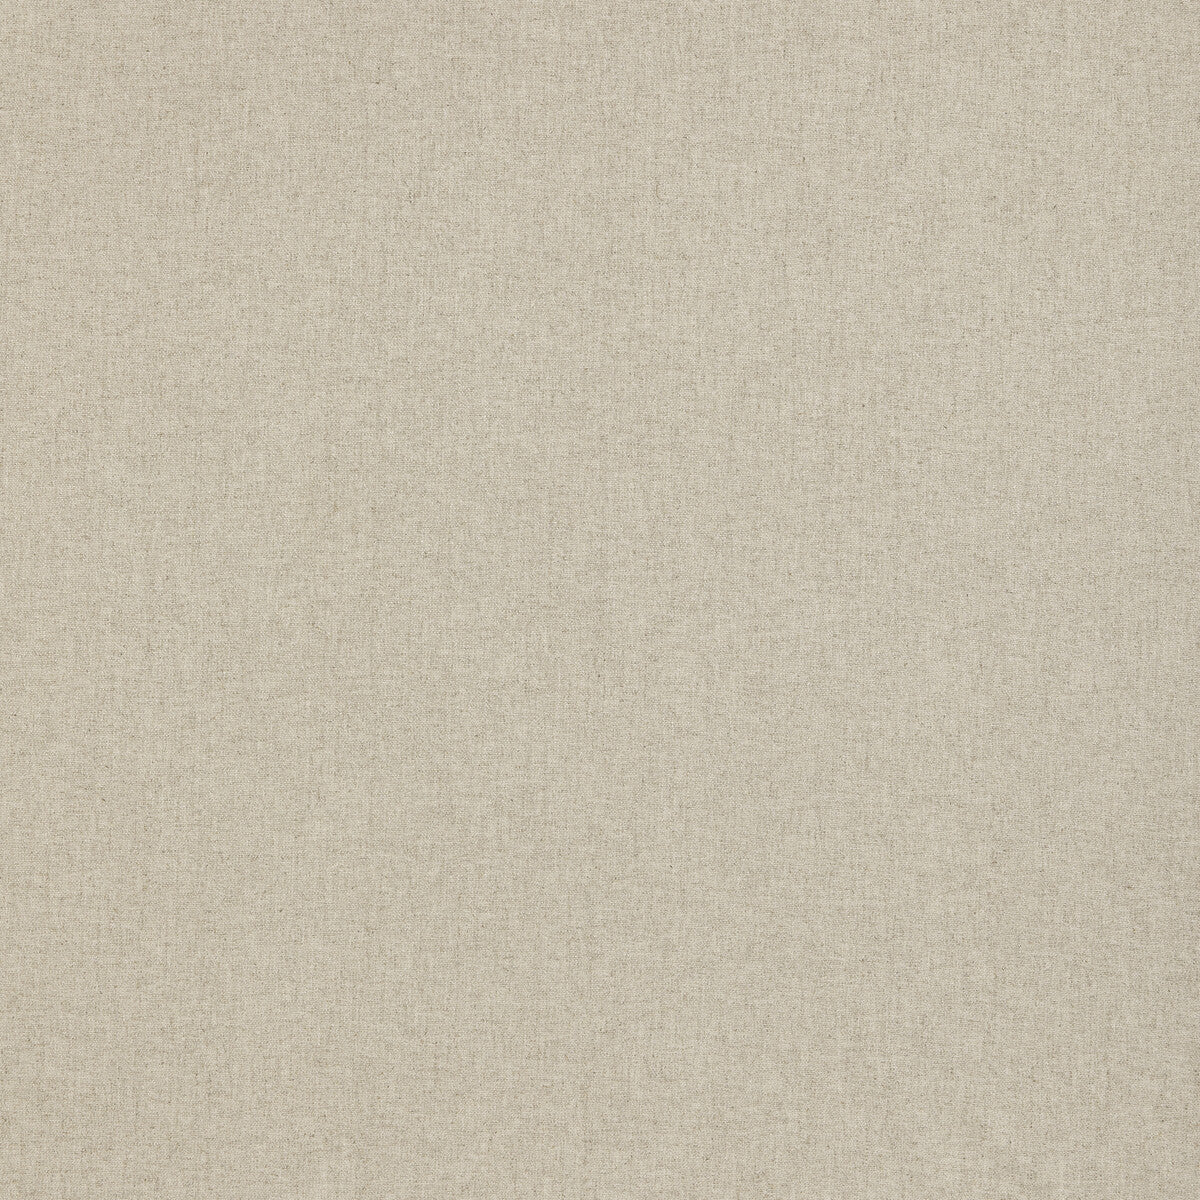 Epoch fabric in parchment color - pattern ED85402.225.0 - by Threads in the Quintessential Naturals collection